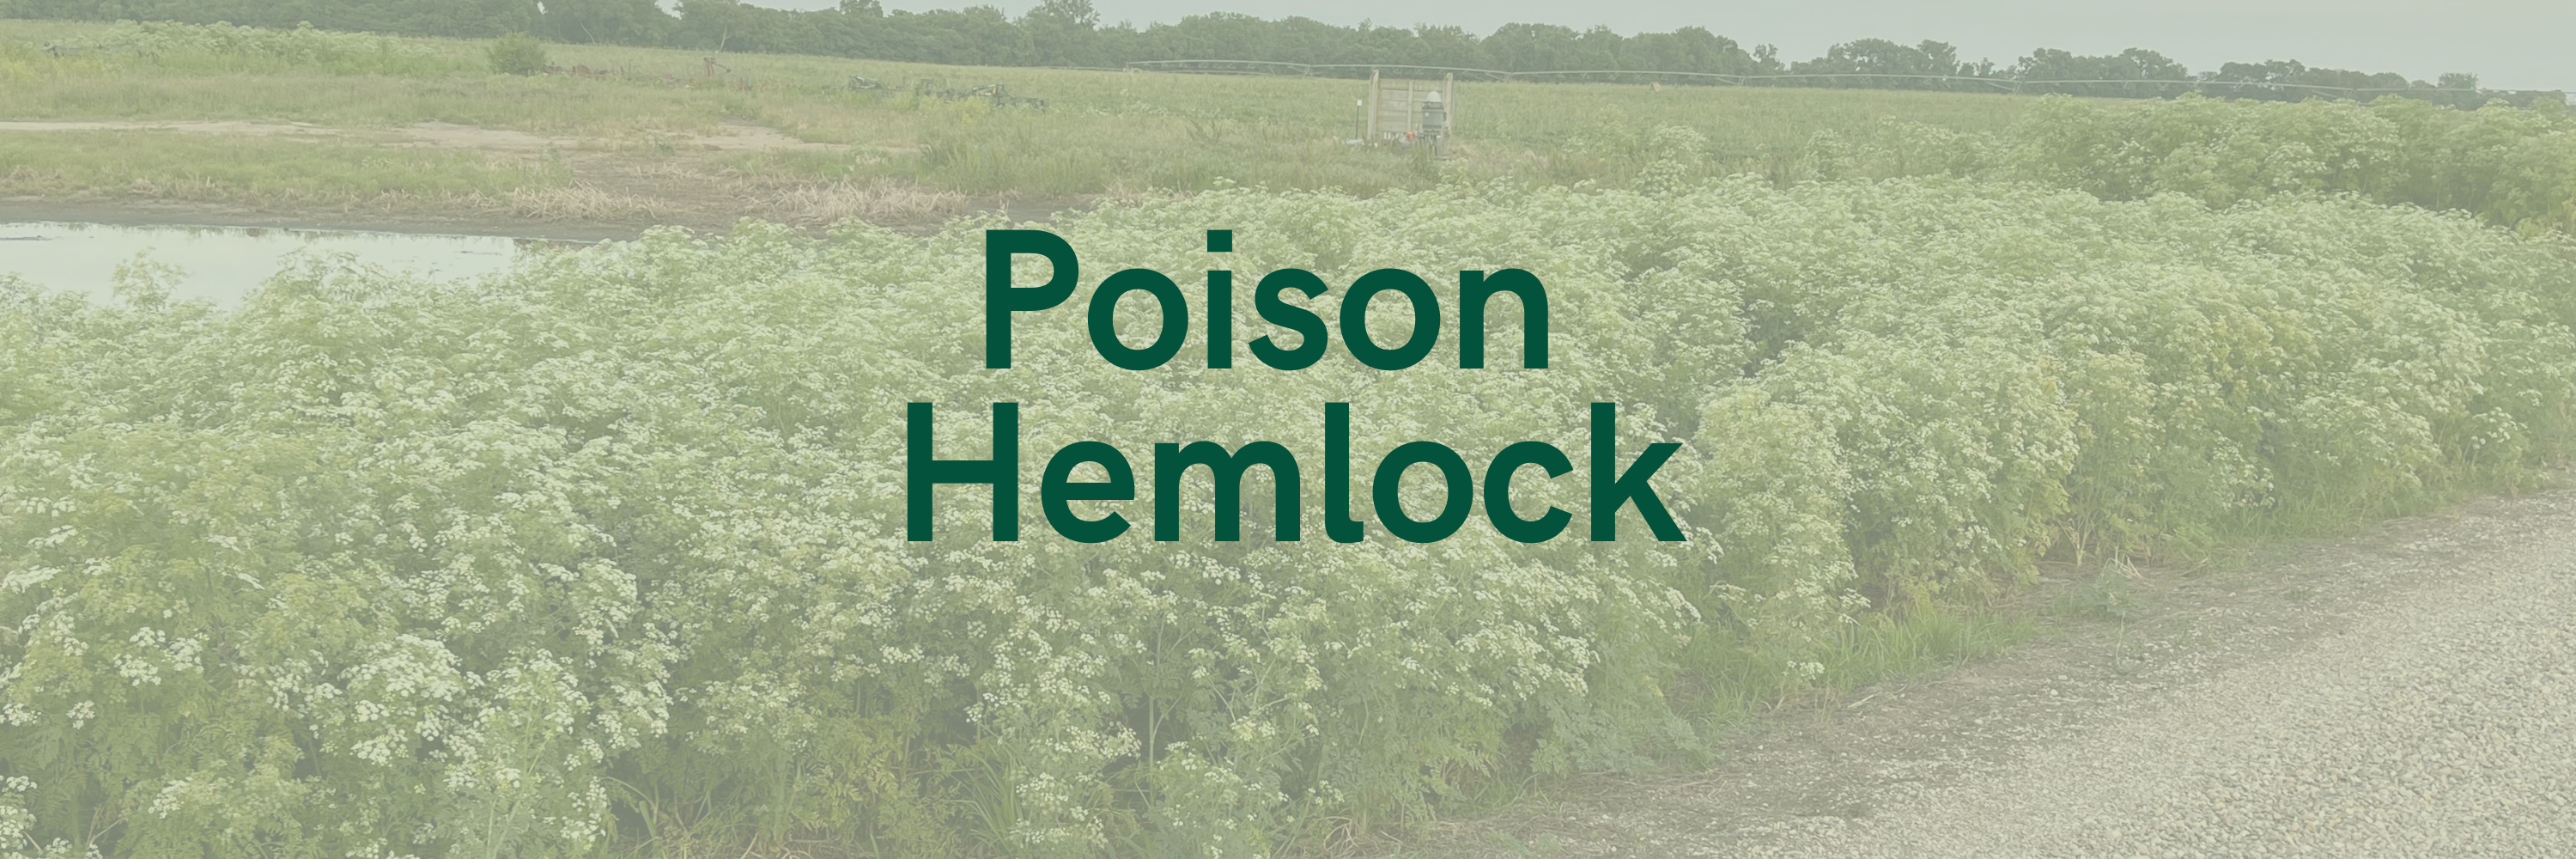 Be on the lookout for Poison Hemlock